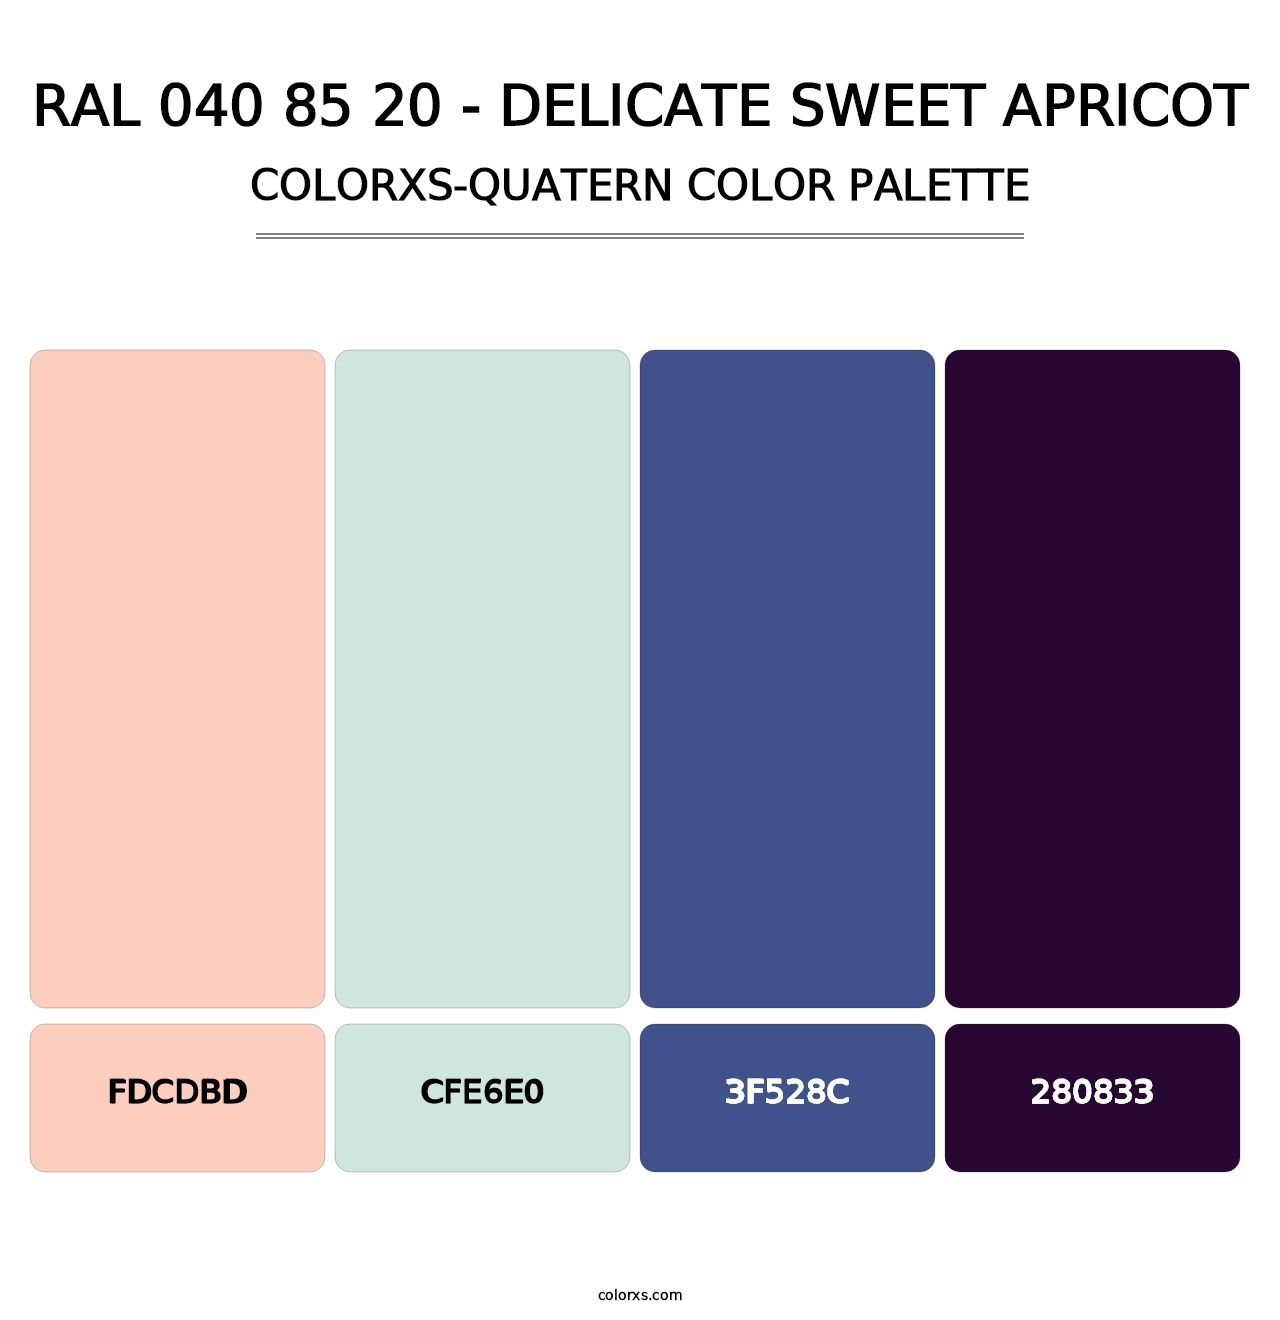 RAL 040 85 20 - Delicate Sweet Apricot - Colorxs Quatern Palette